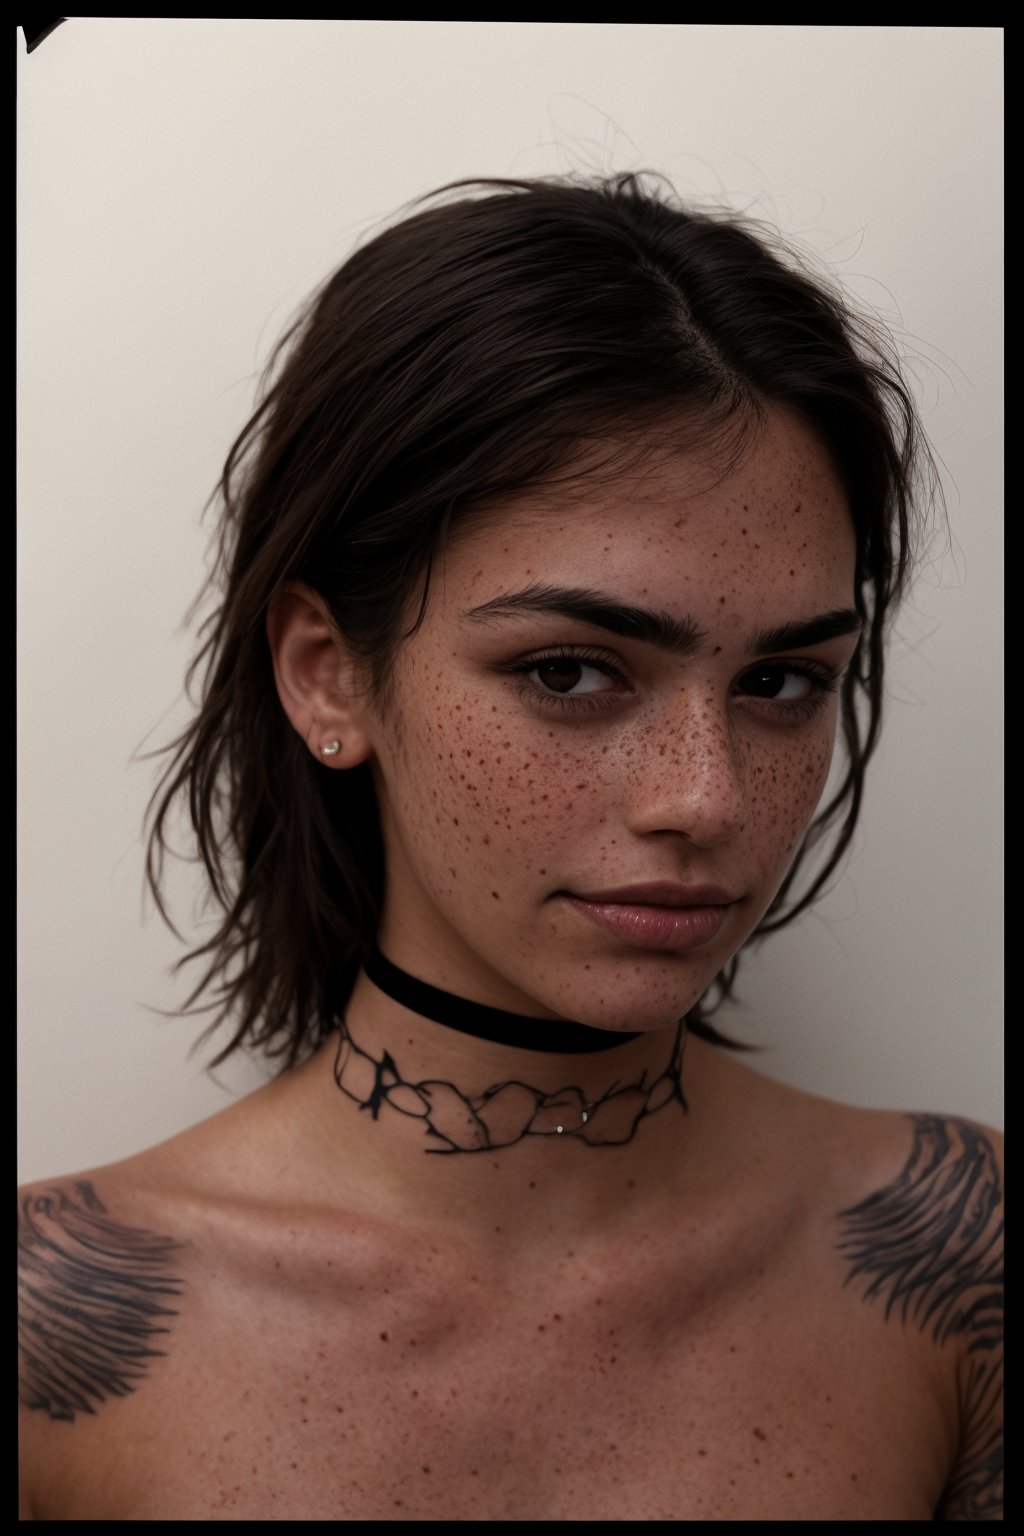 photo, rule of thirds, dramatic lighting, medium hair, detailed face, detailed nose, woman wearing tank top, freckles, collar or choker, smirk, tattoo, intricate background
,realism,realistic,raw,analog,woman,portrait,photorealistic,analog,realism,Indian 